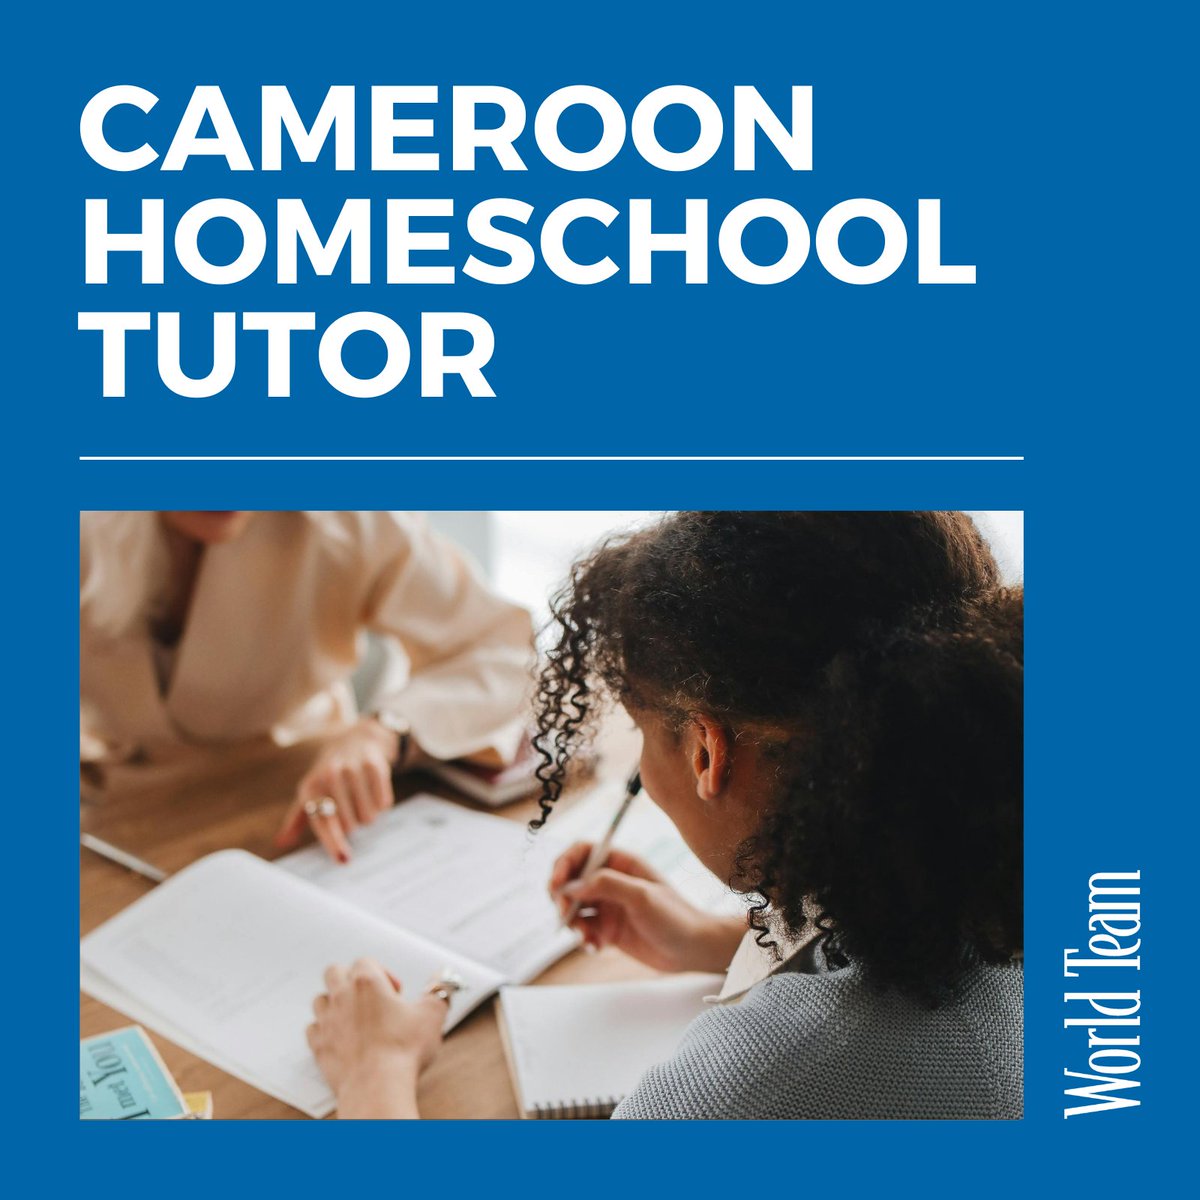 World Team Cameroon has a need for a homeschool tutor! Learn more about the position and how you can be a blessing to a family in Cameroon: loom.ly/dpGQu6A